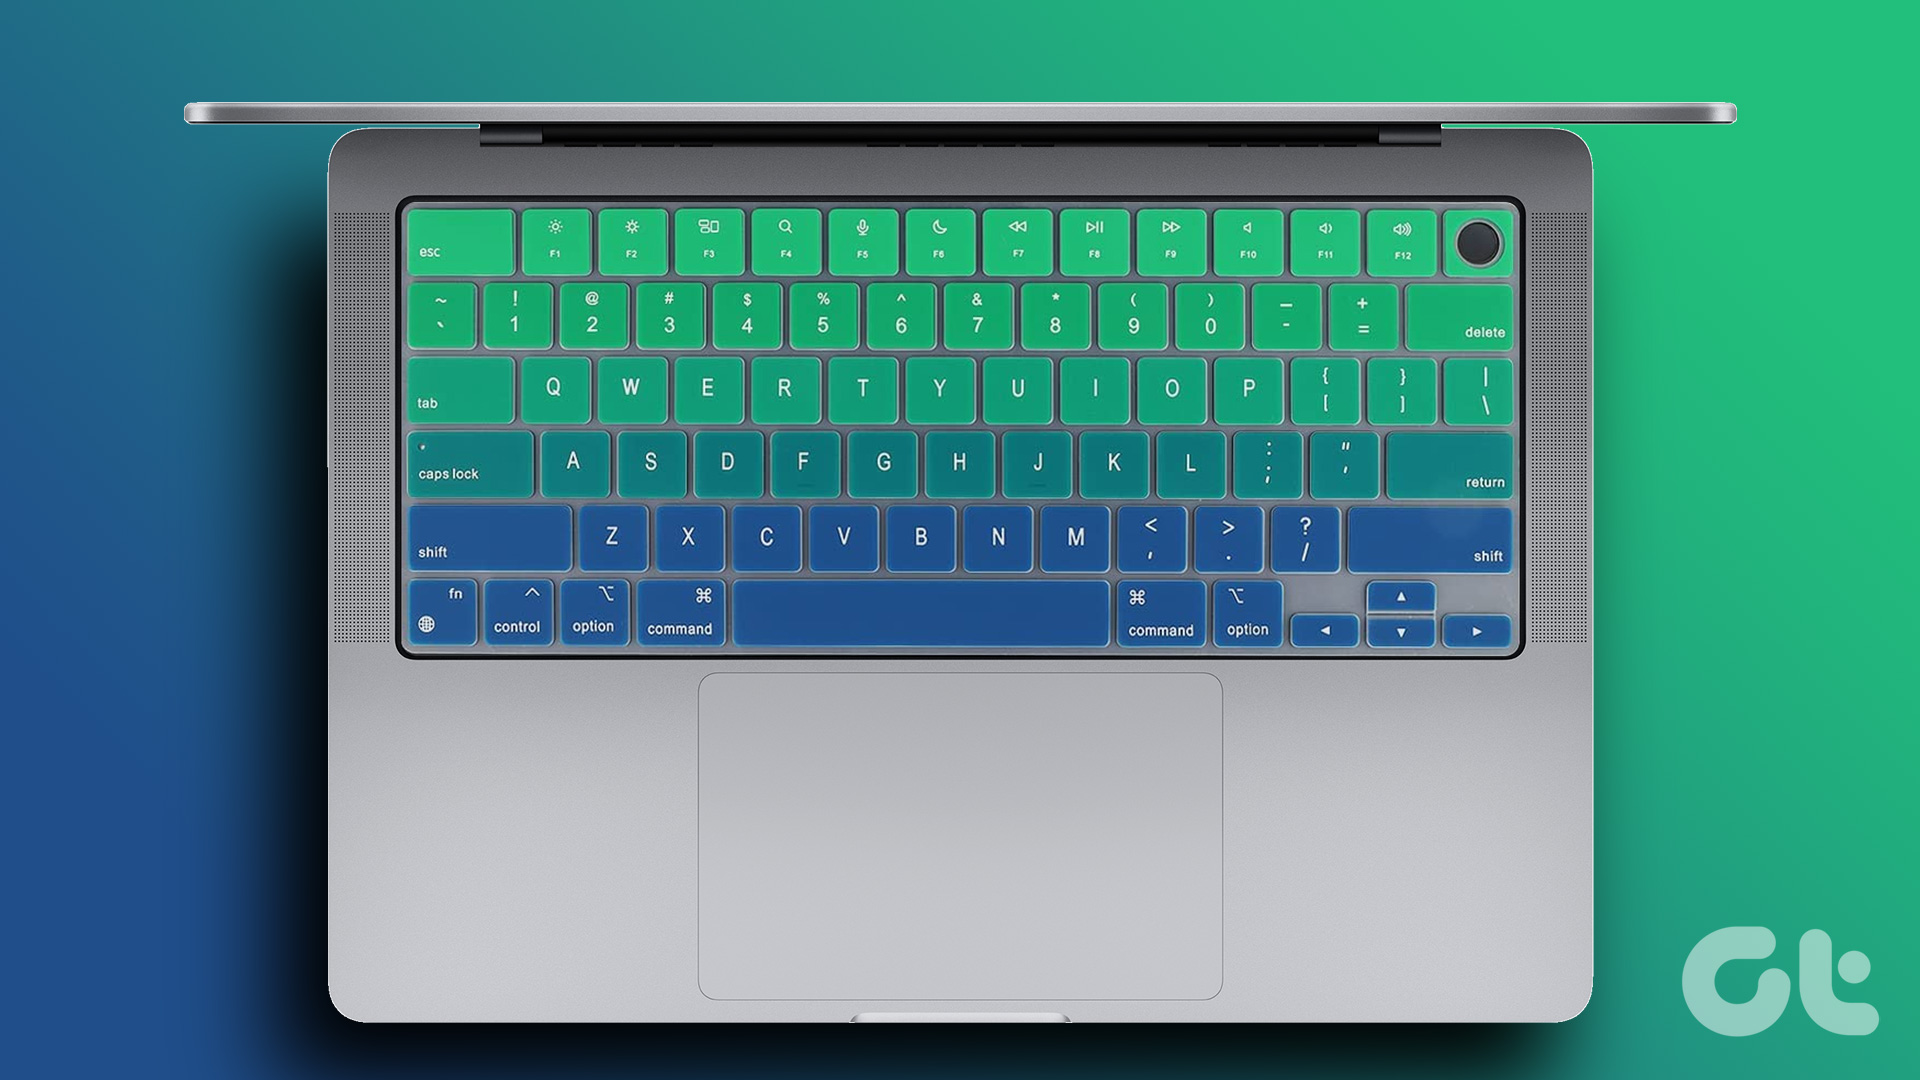 keyboard covers for MacBook Pro